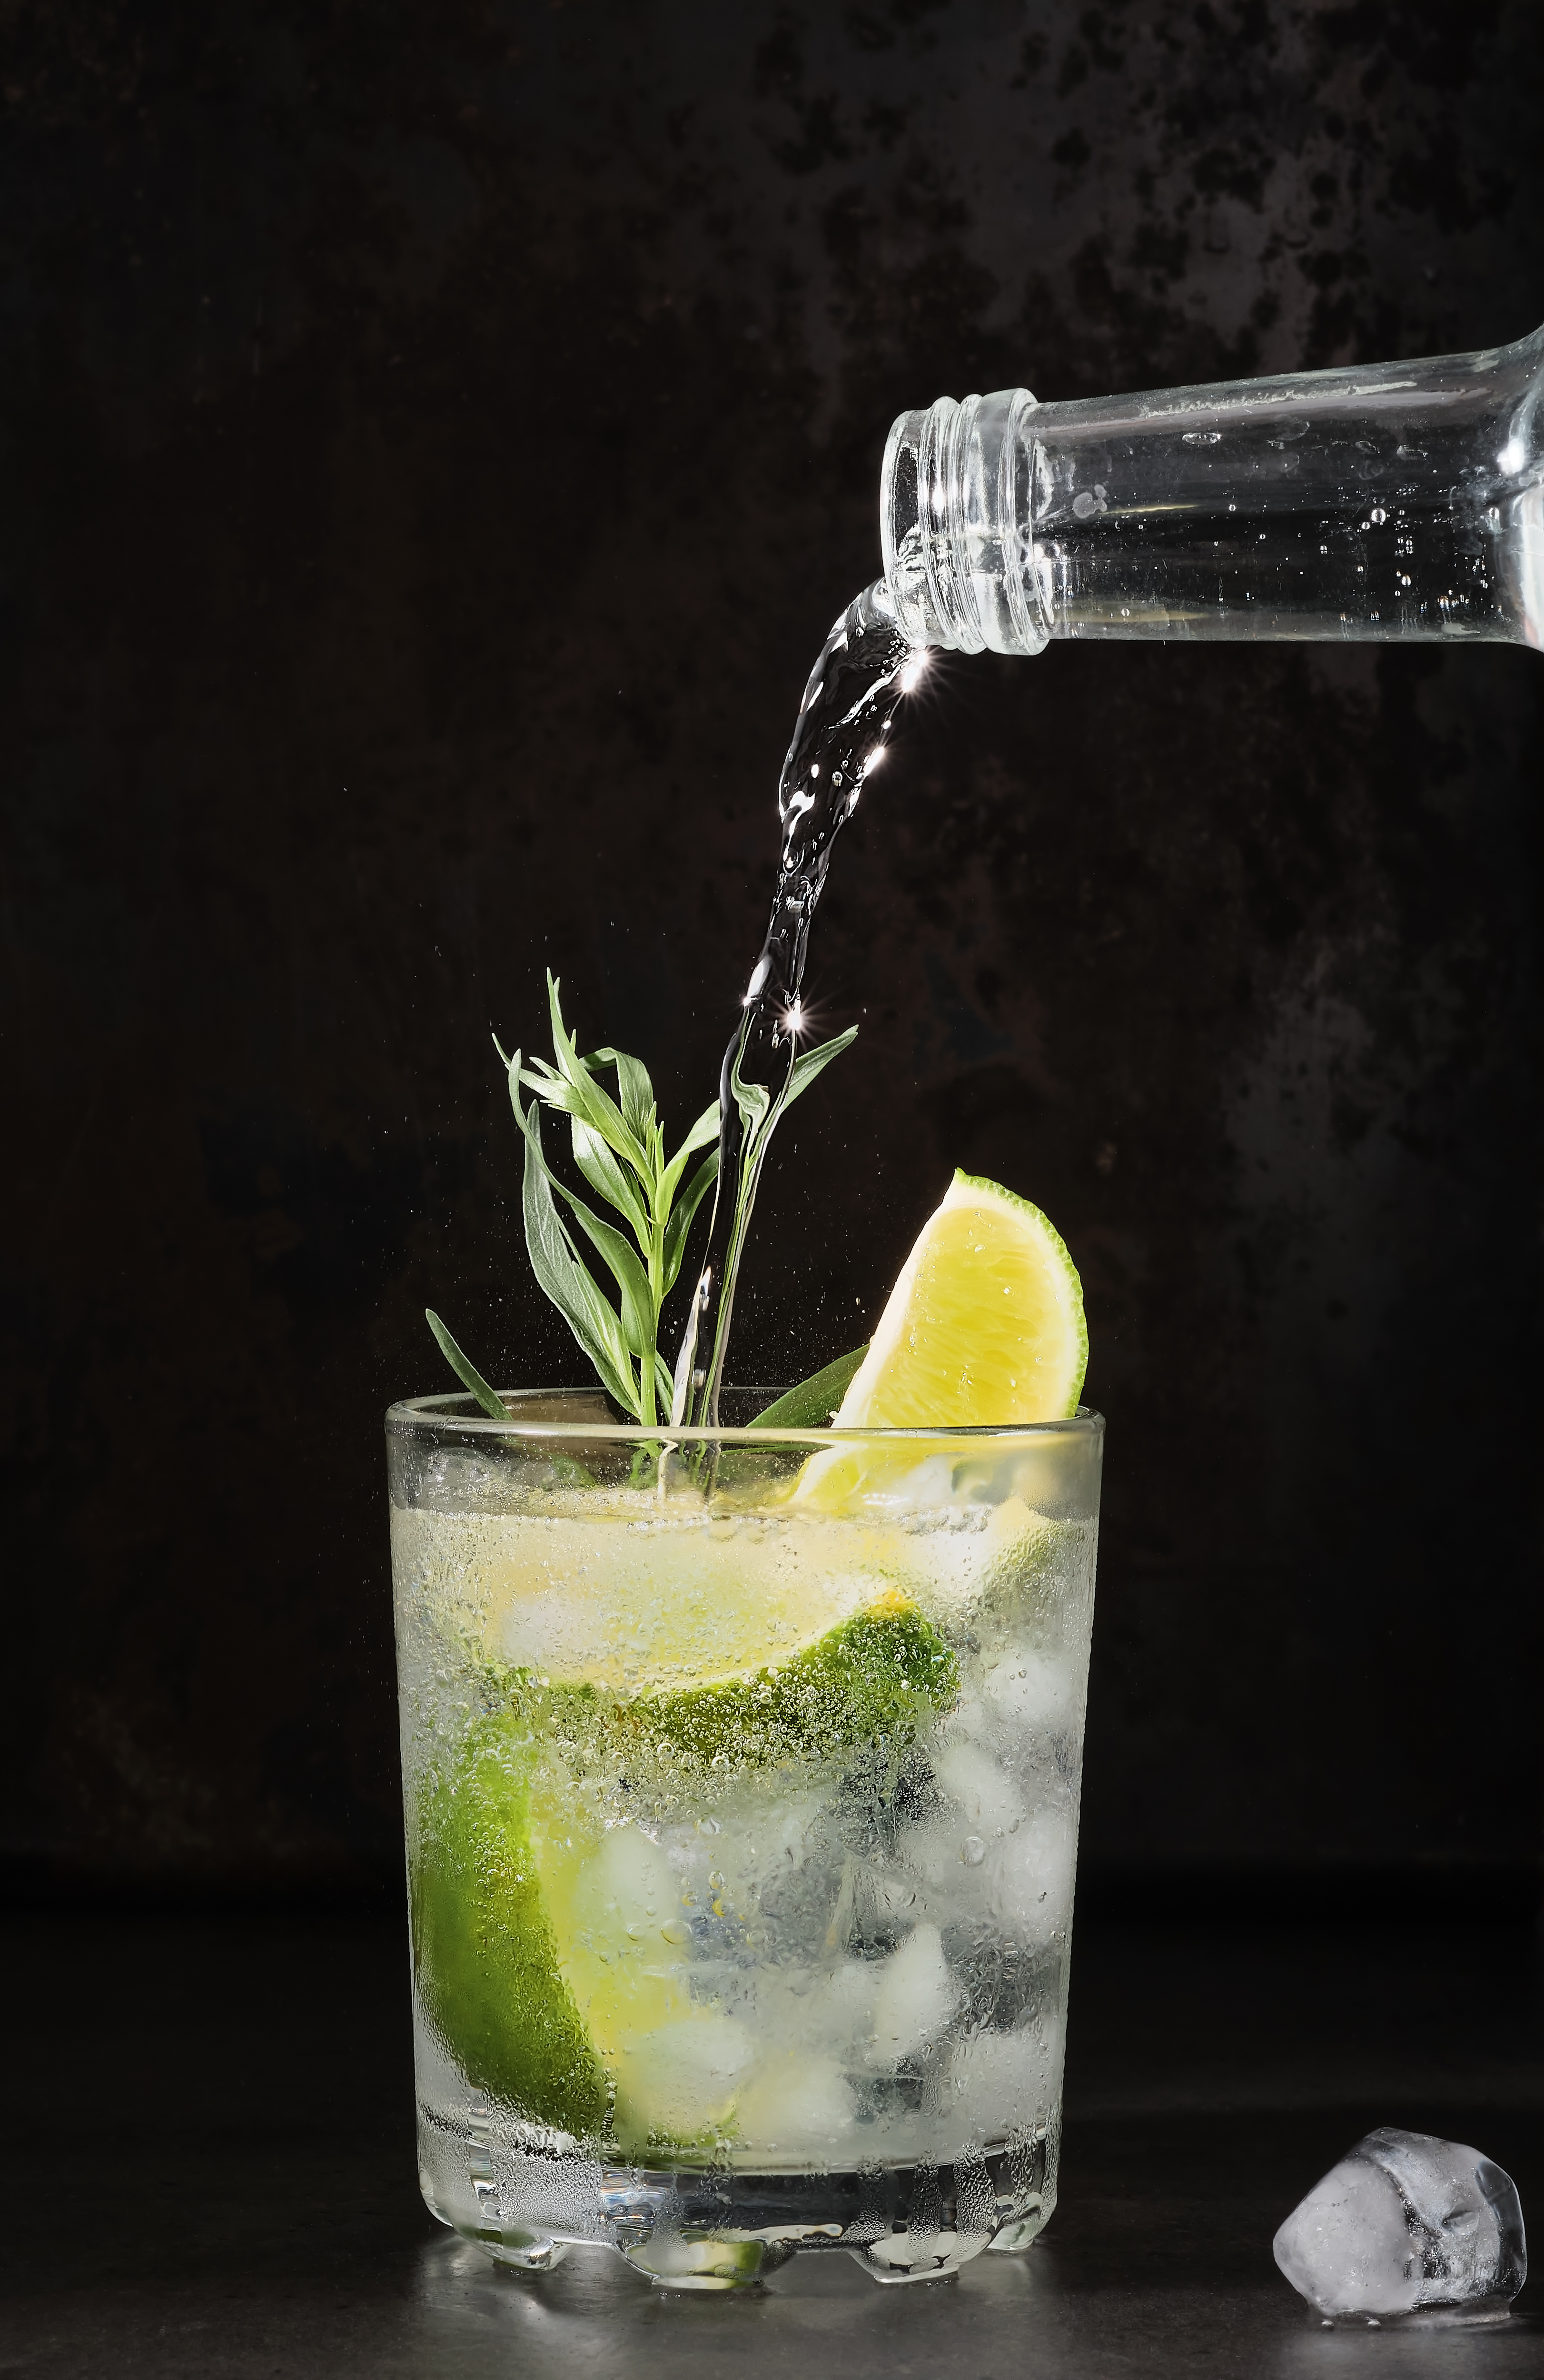 glass-lime-lemonade-dark-table-summer-drinks-pure-mineral-water-is-poured-into-glass-vertical-frame-selective-focus-homemade-drink-with-lime-tarragon-ice-cubes-cold-fresh-drinks-idea